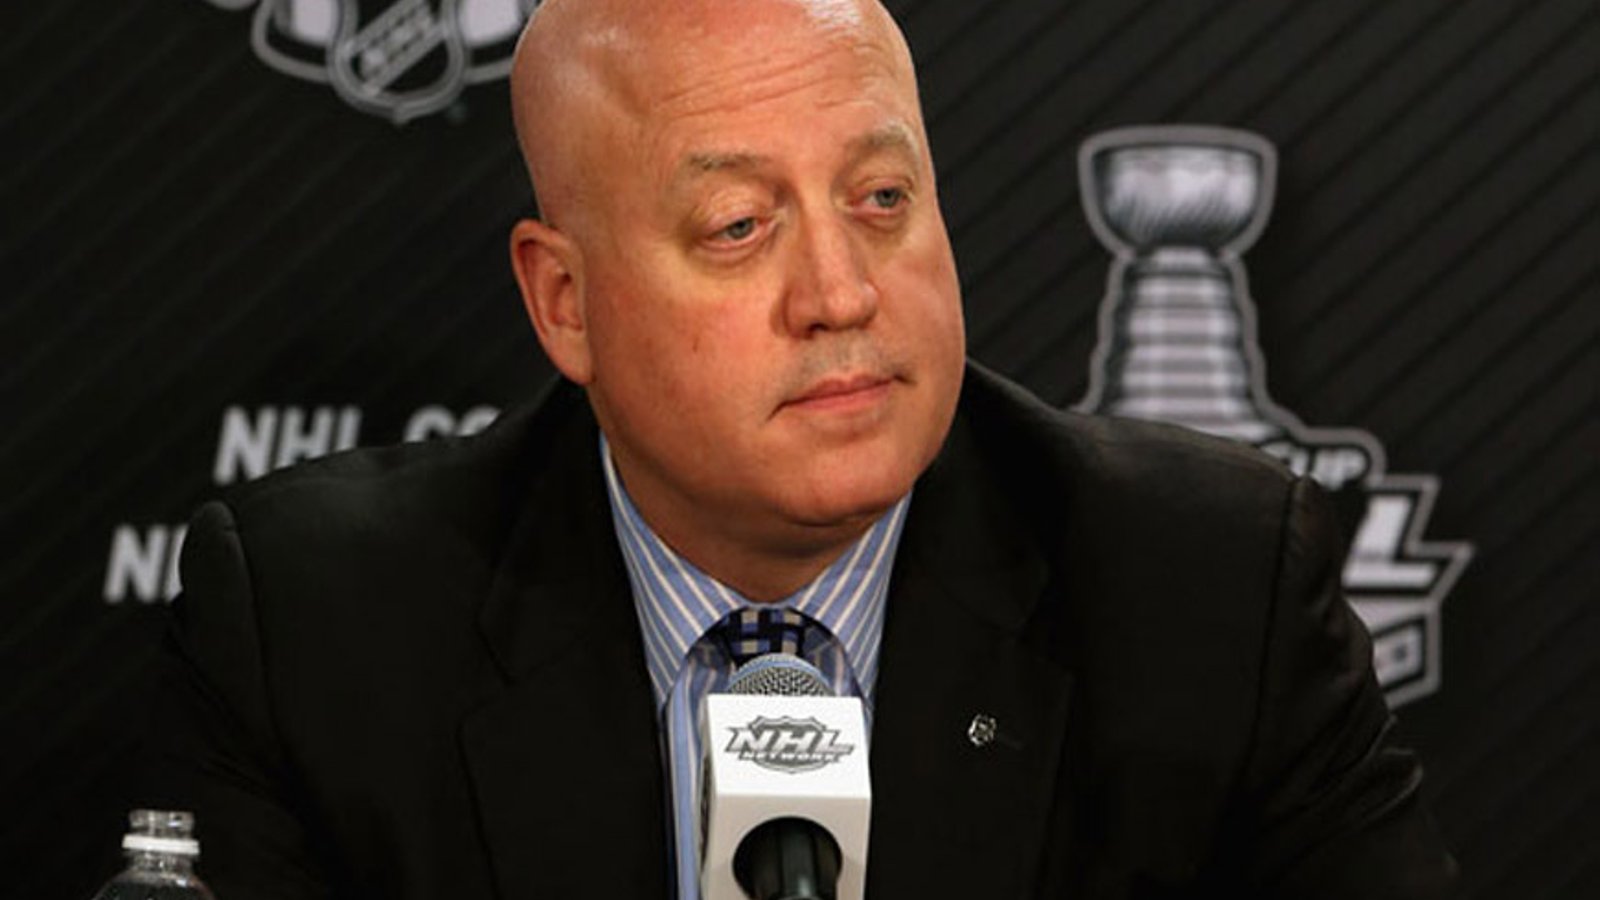 NHL Deputy Commissioner: No Lockouts In Sight